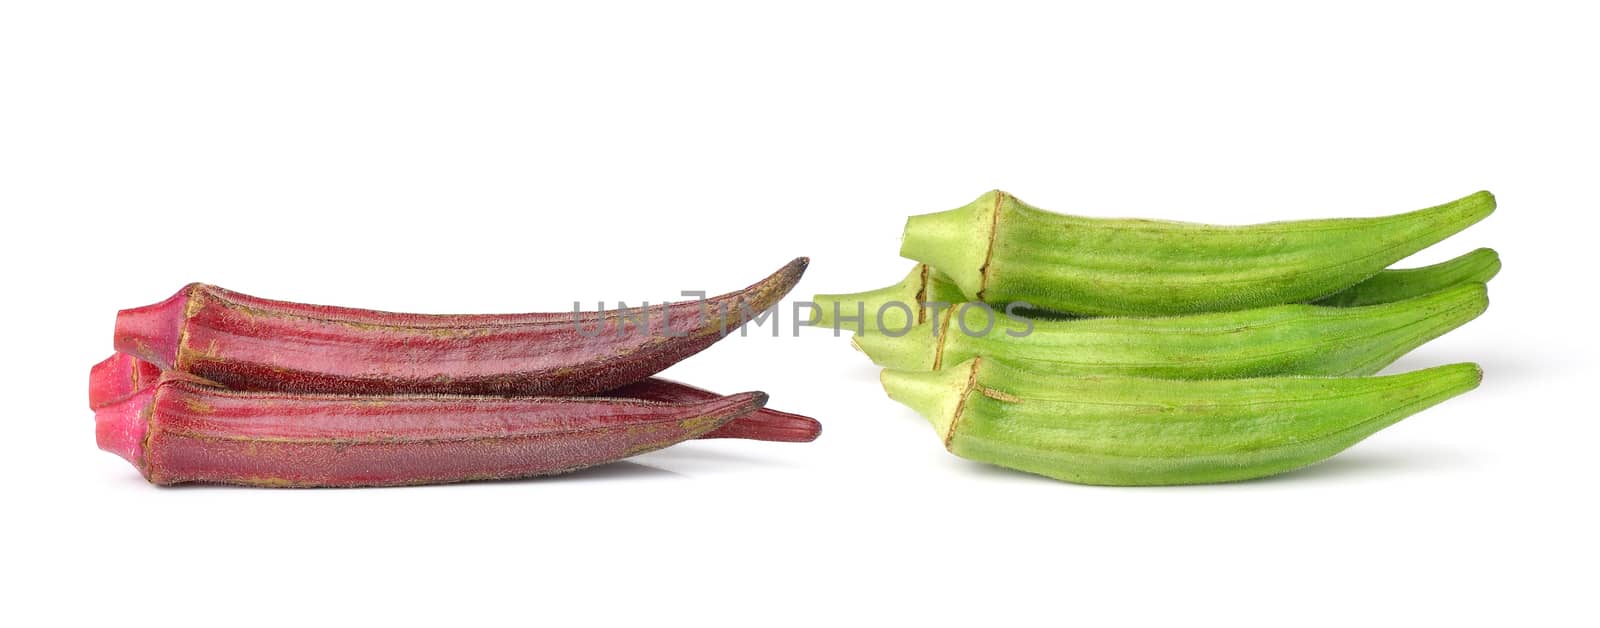 Hibiscus sabdariffa or roselle fruits isolated on white backgrou by sommai